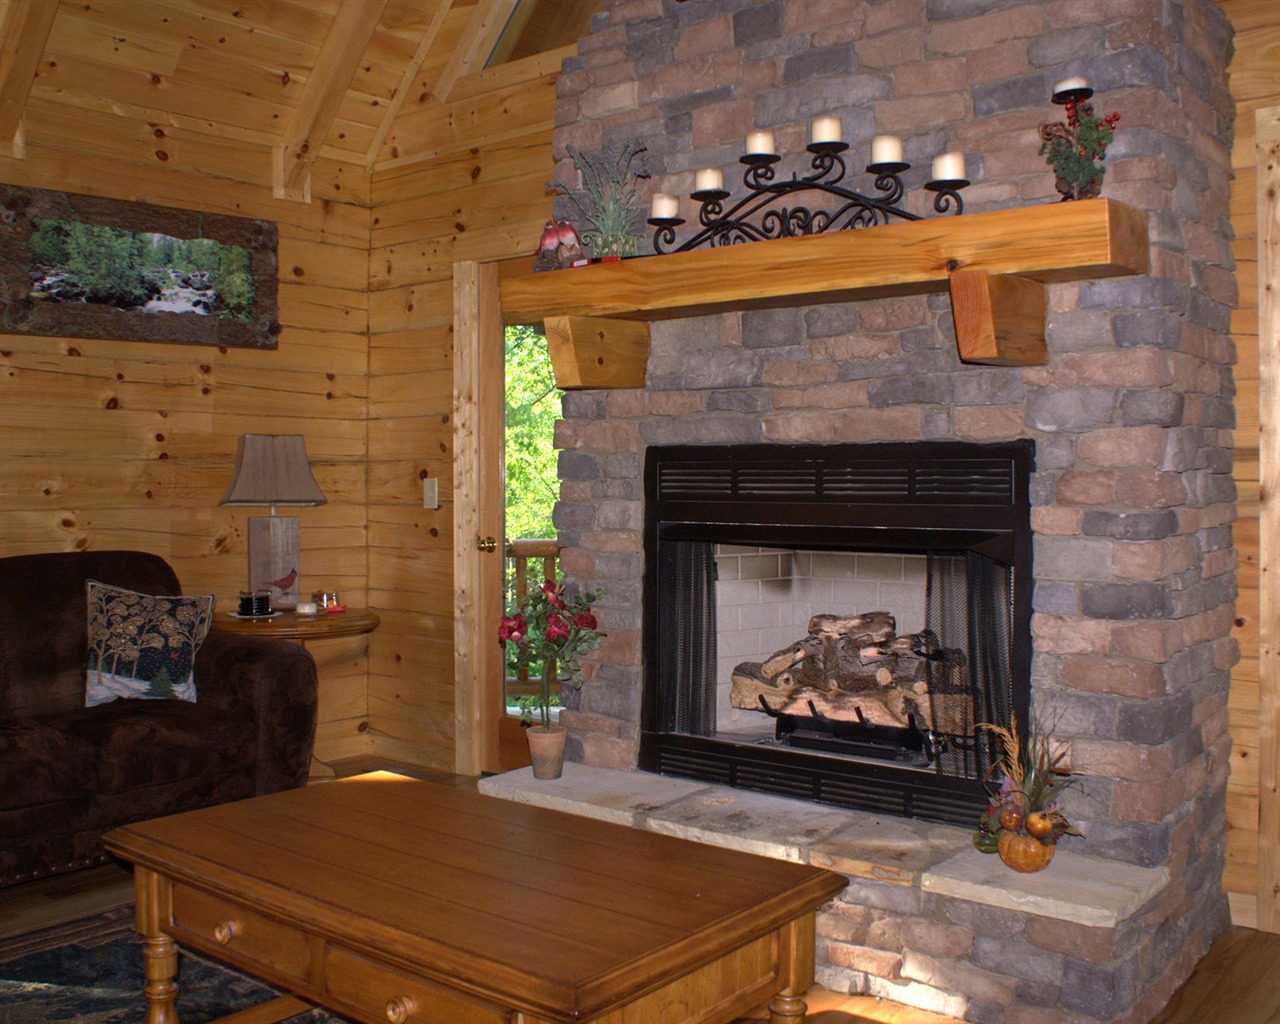 Western-style family fireplace wallpaper (1) #12 - 1280x1024